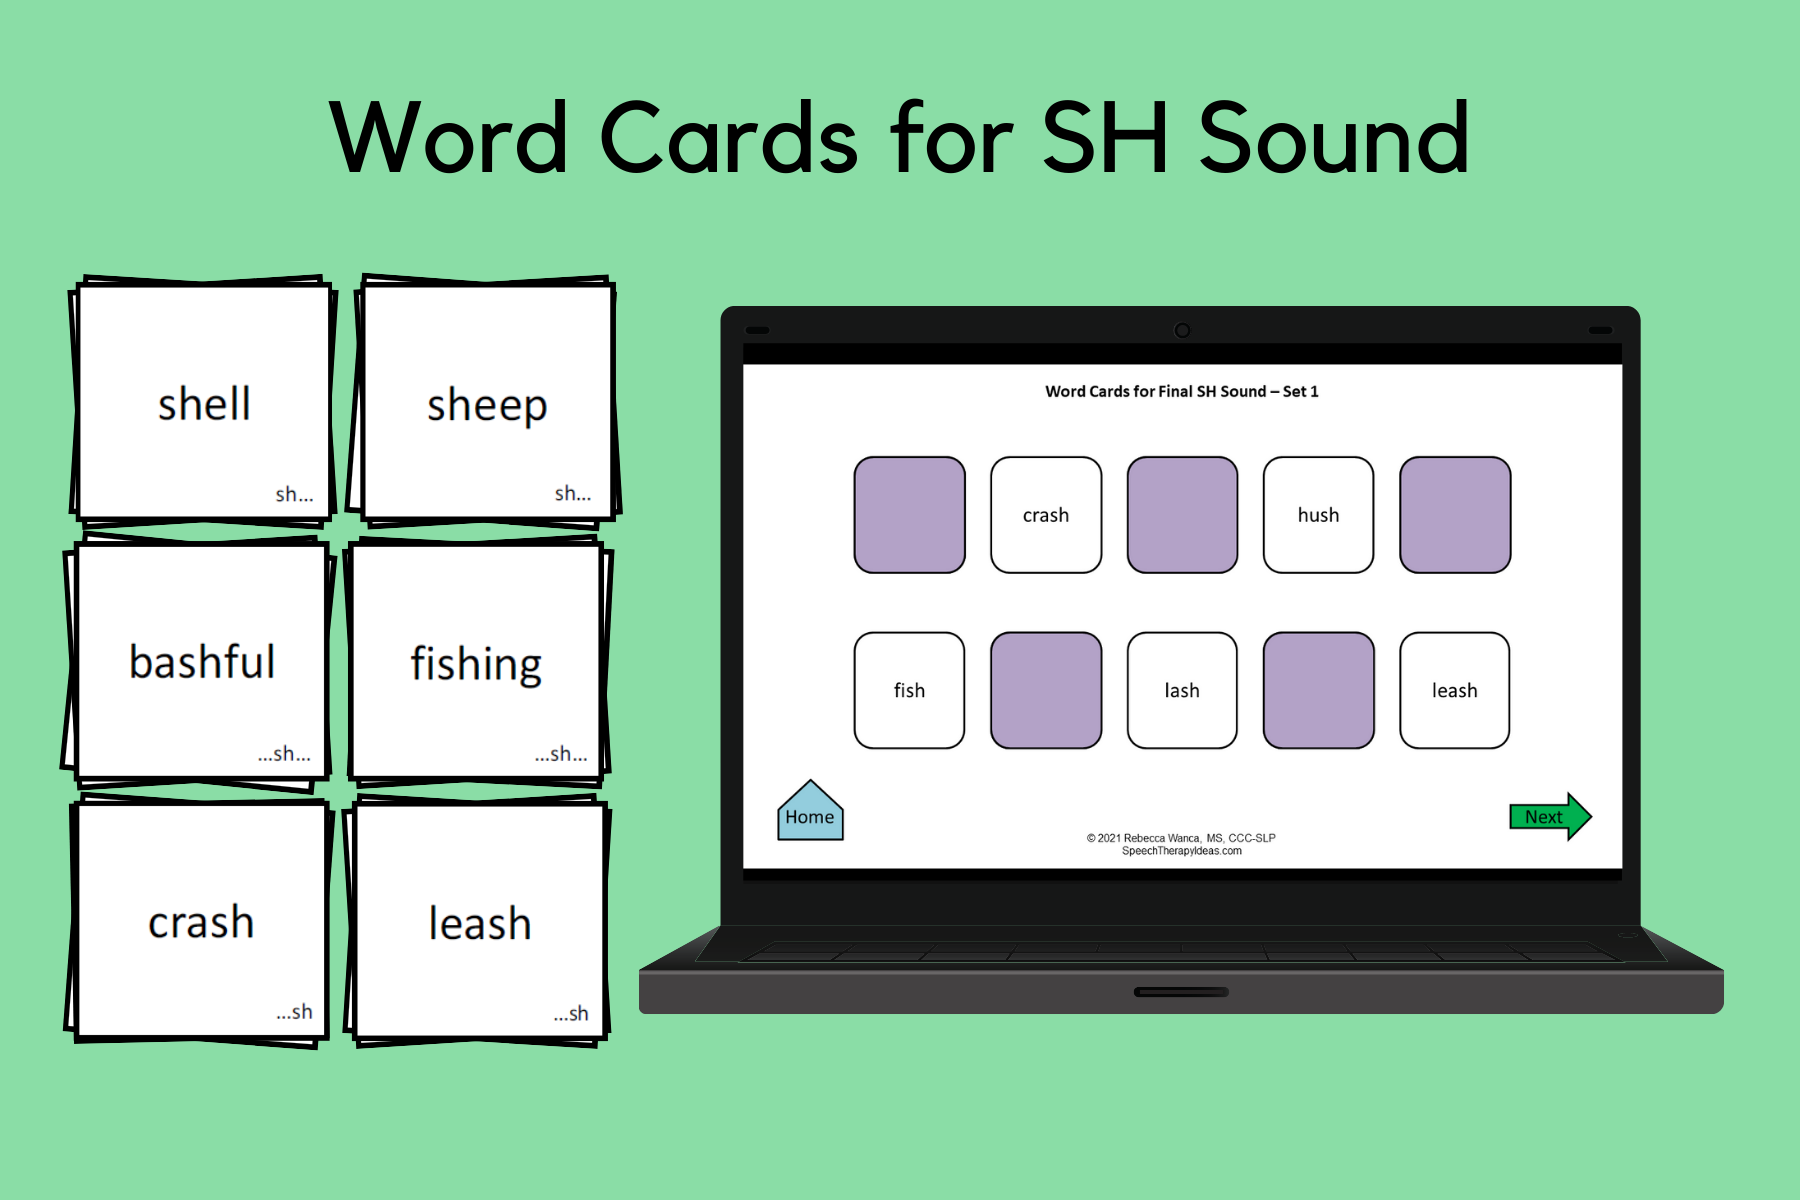 Word Cards for SH Sound